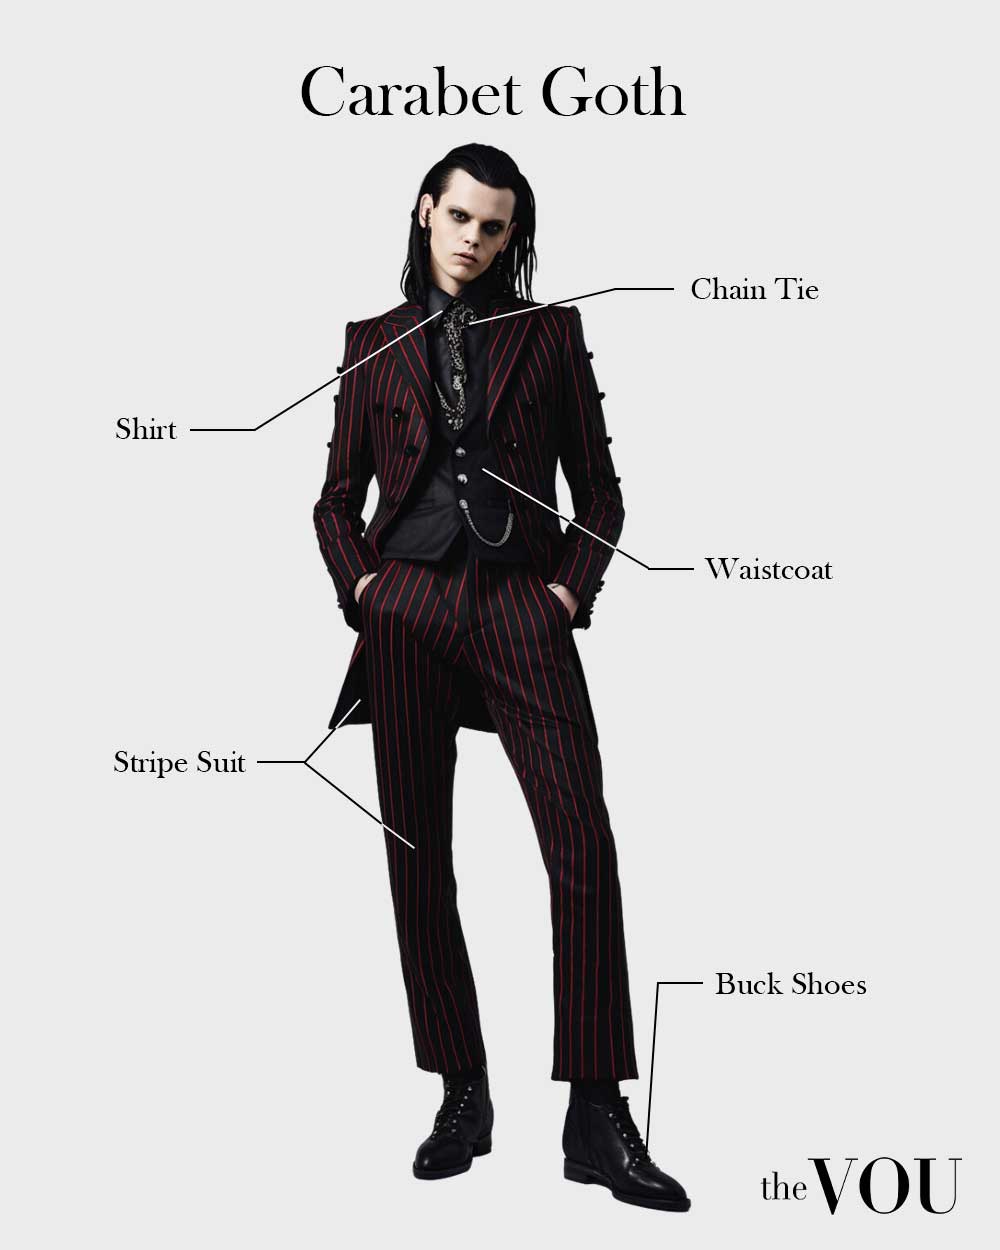 How to Dress Goth: 25 Variations to Master the Gothic Look